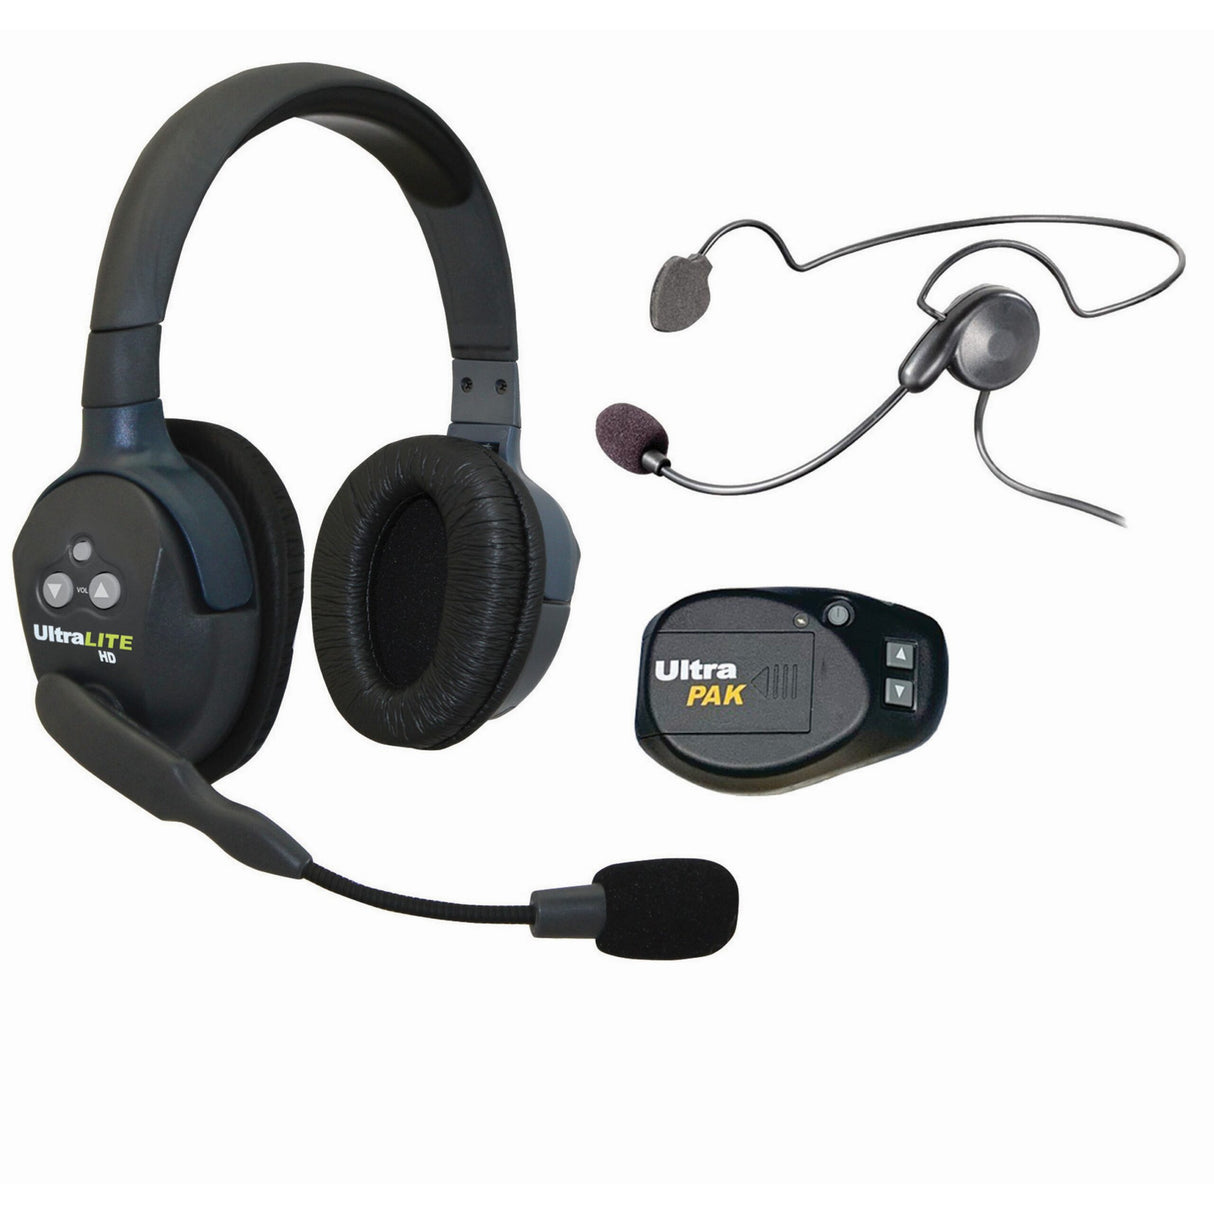 Eartec DMCYB4 1 Double MAIN UltraLITE and 3 Cyber/UltraPAK Headsets